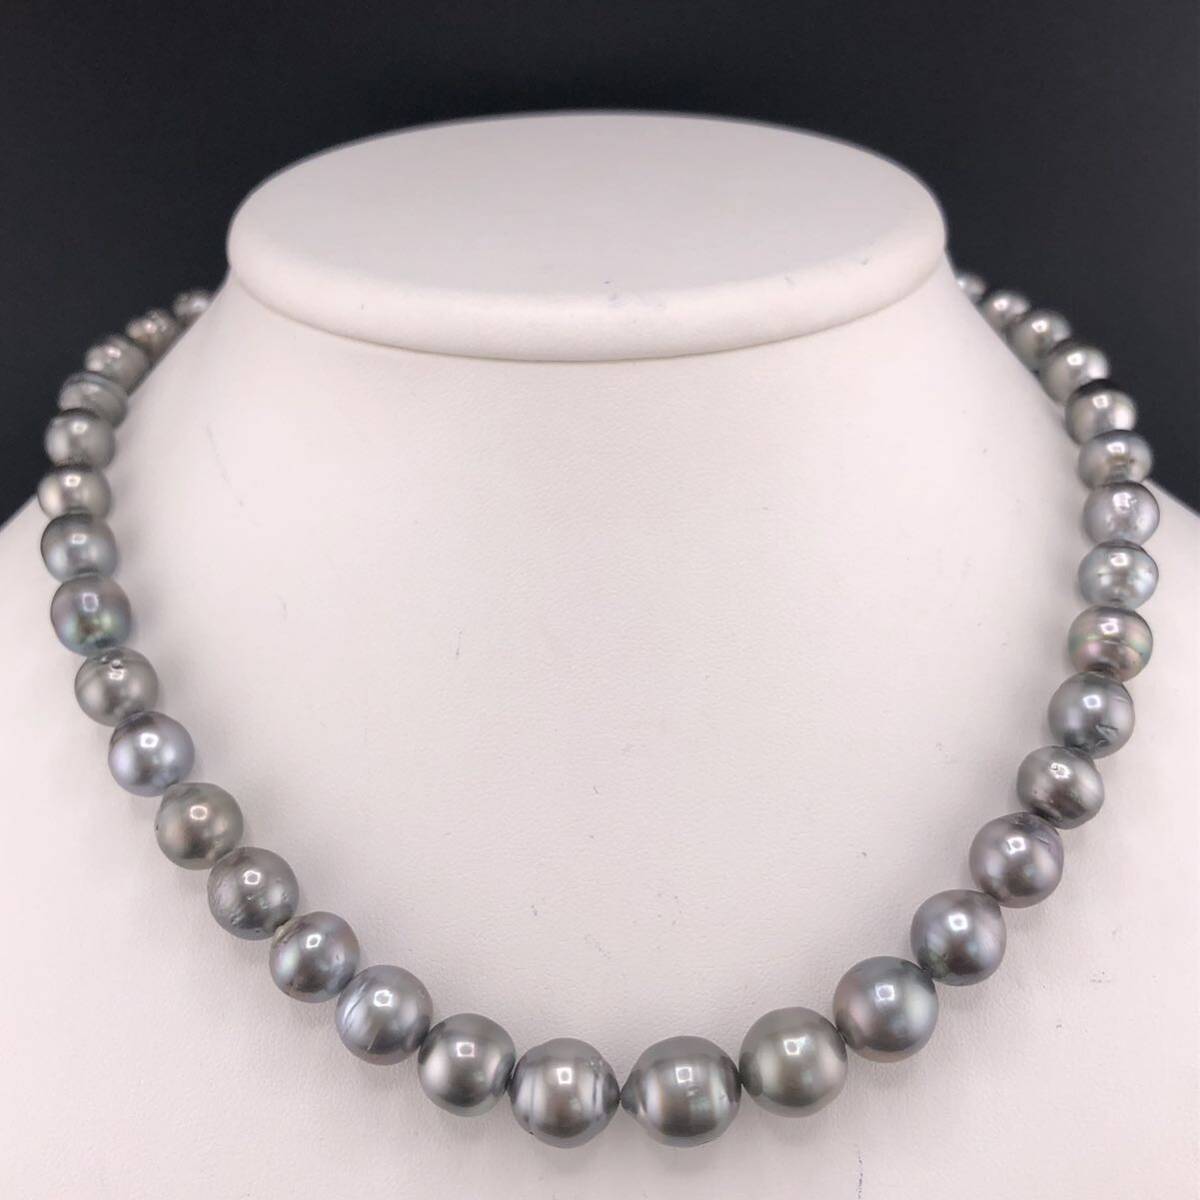 E03-4446 黒蝶パールネックレス 8.0mm~11.0mm 41cm 49g ( 黒蝶真珠 Pearl necklace SILVER )